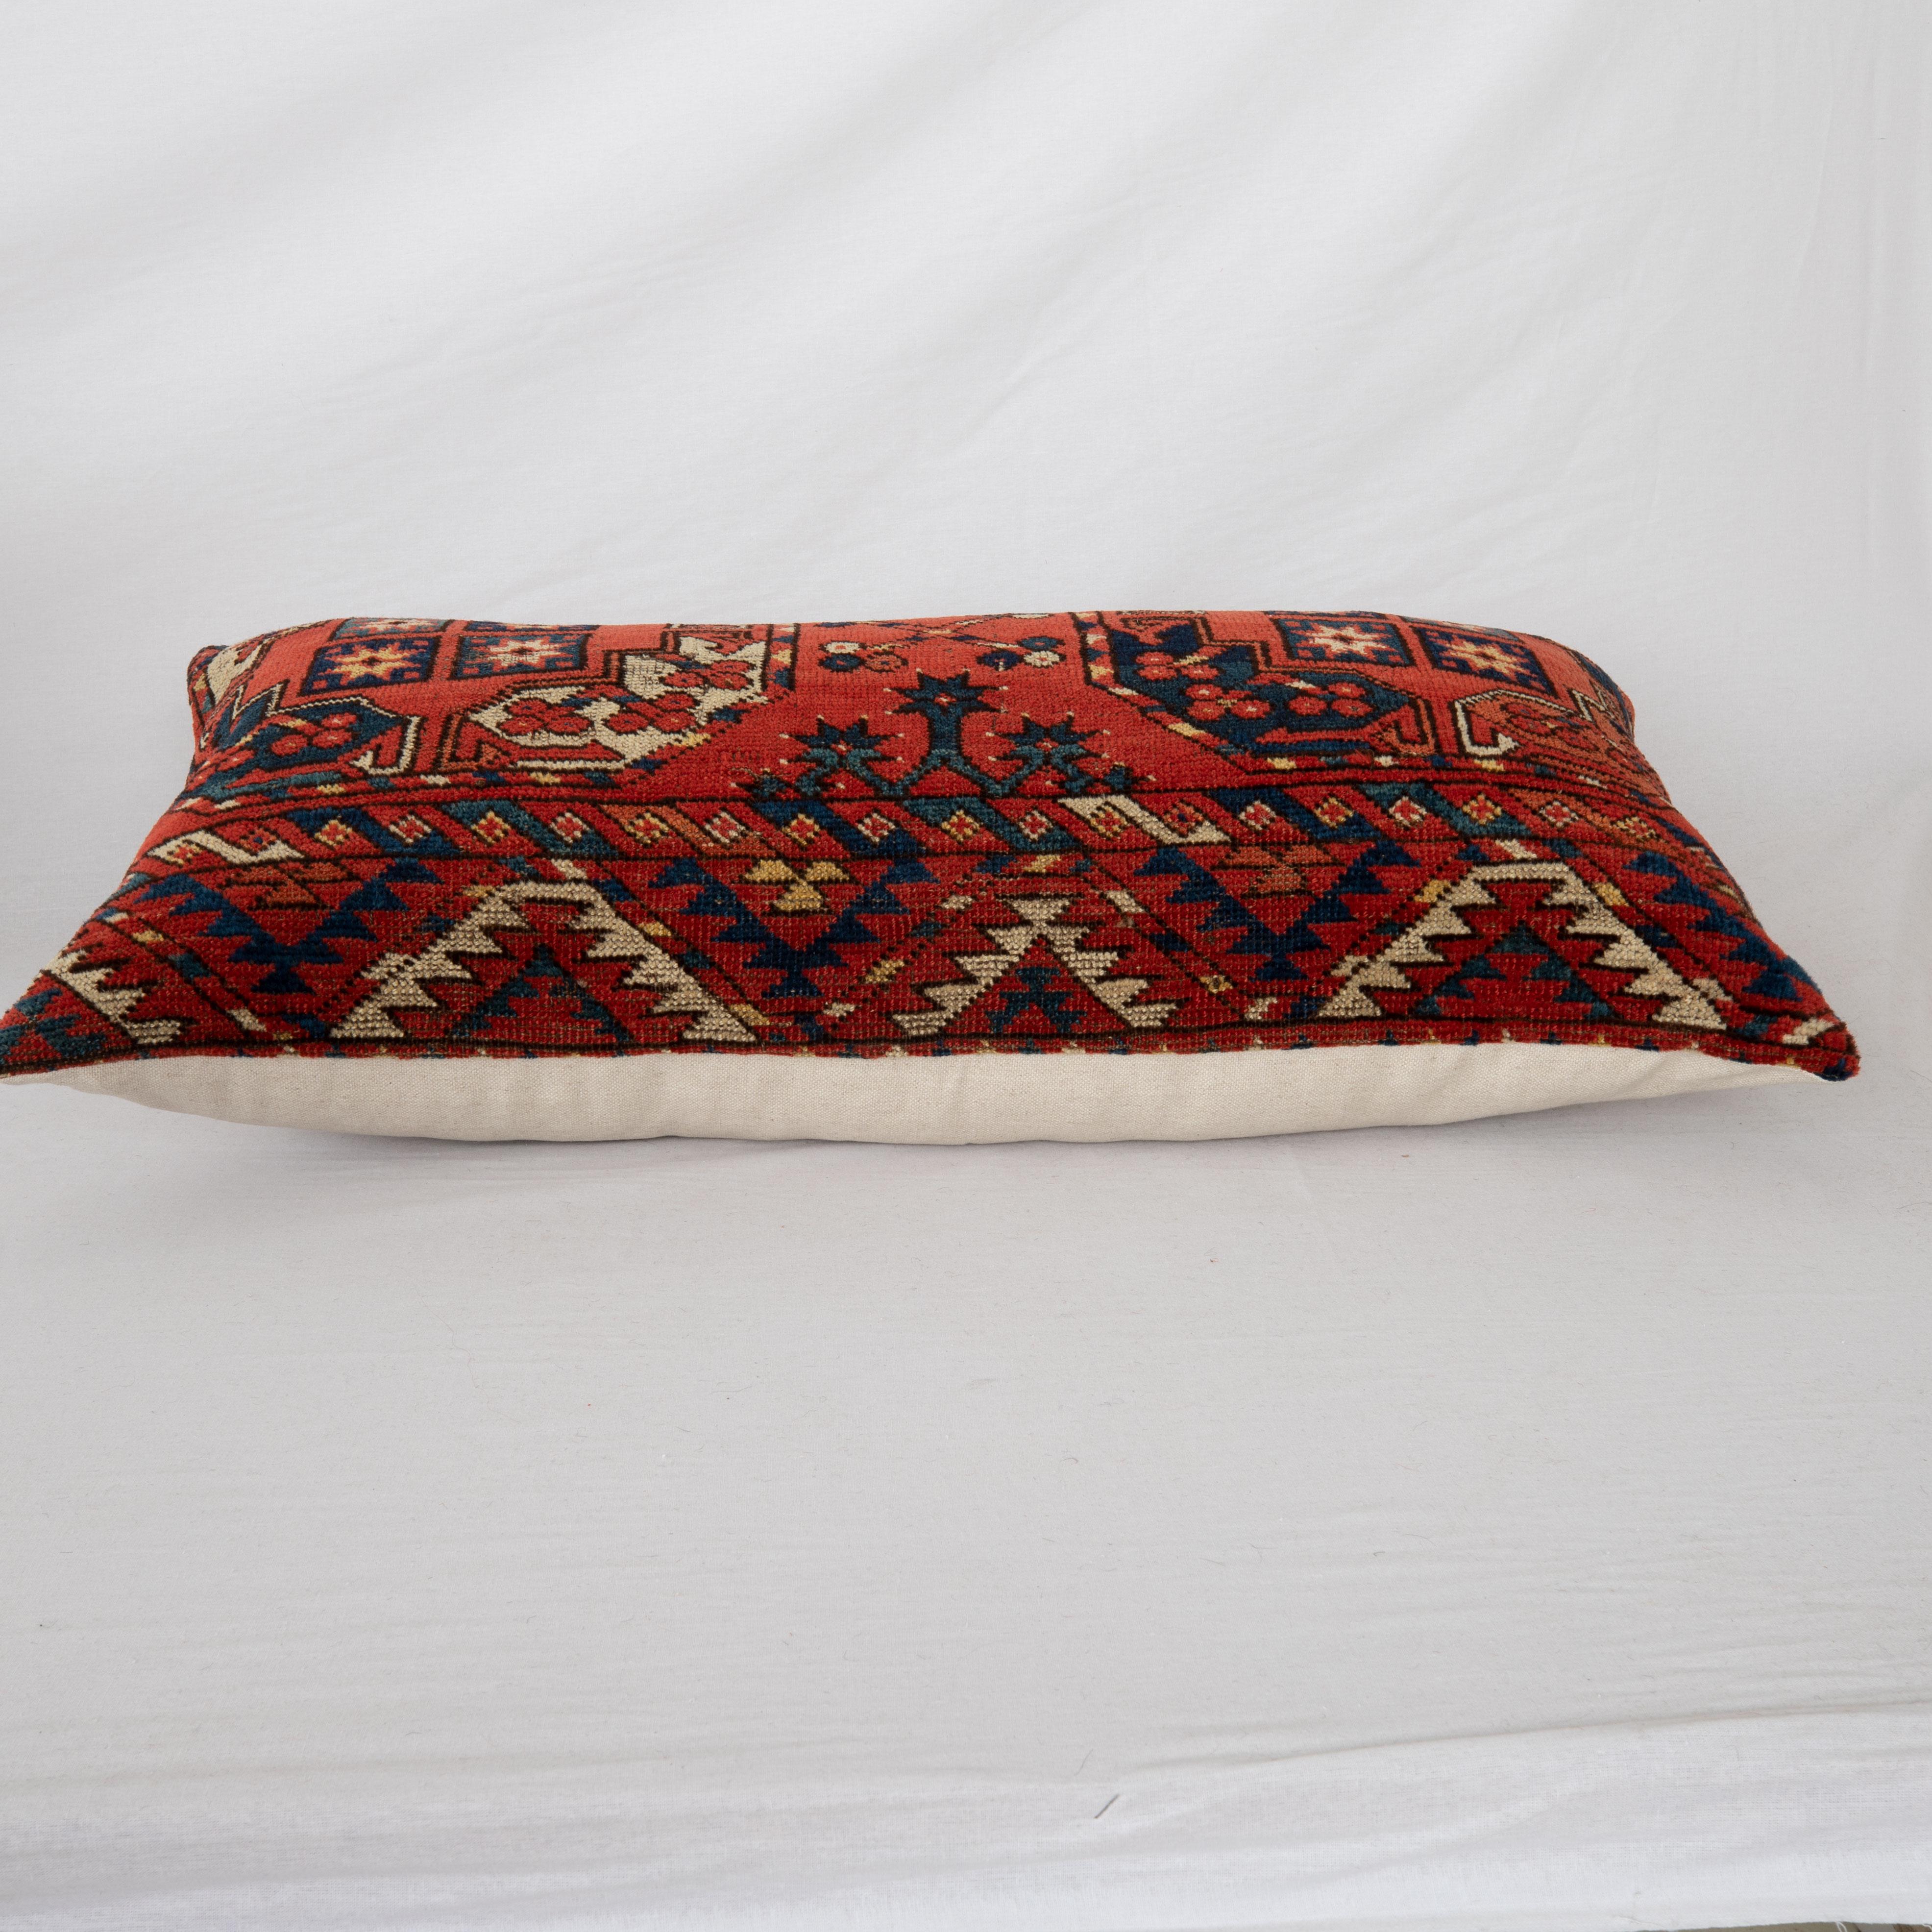 Hand-Woven Antique Rug Pillowcase Made from a Mid-19th C. Turkmen Ersari Rug Fragment For Sale